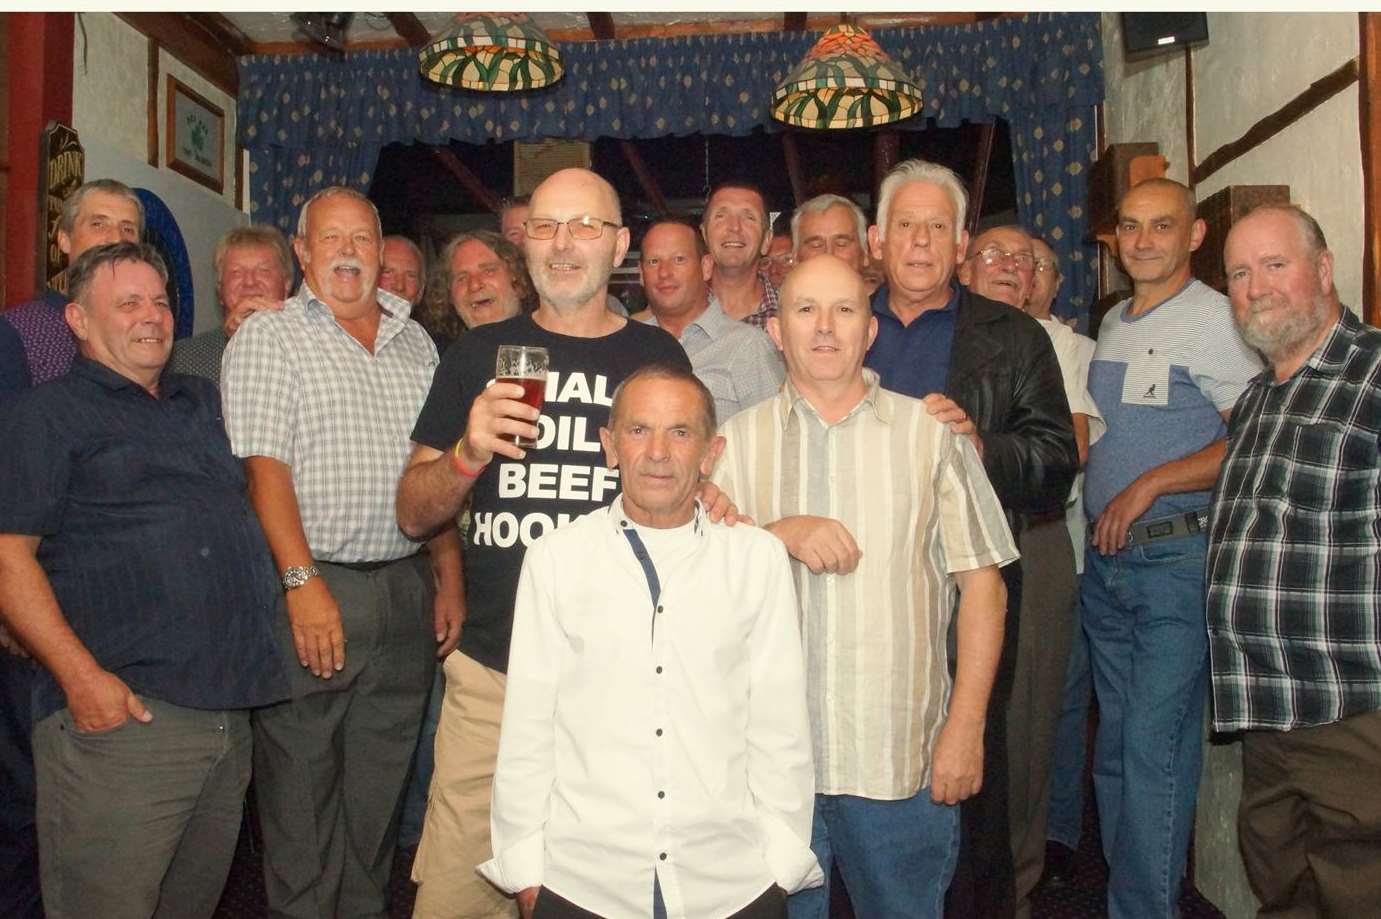 A reunion for former steel mill workers was held at the Albion pub in Blue Town